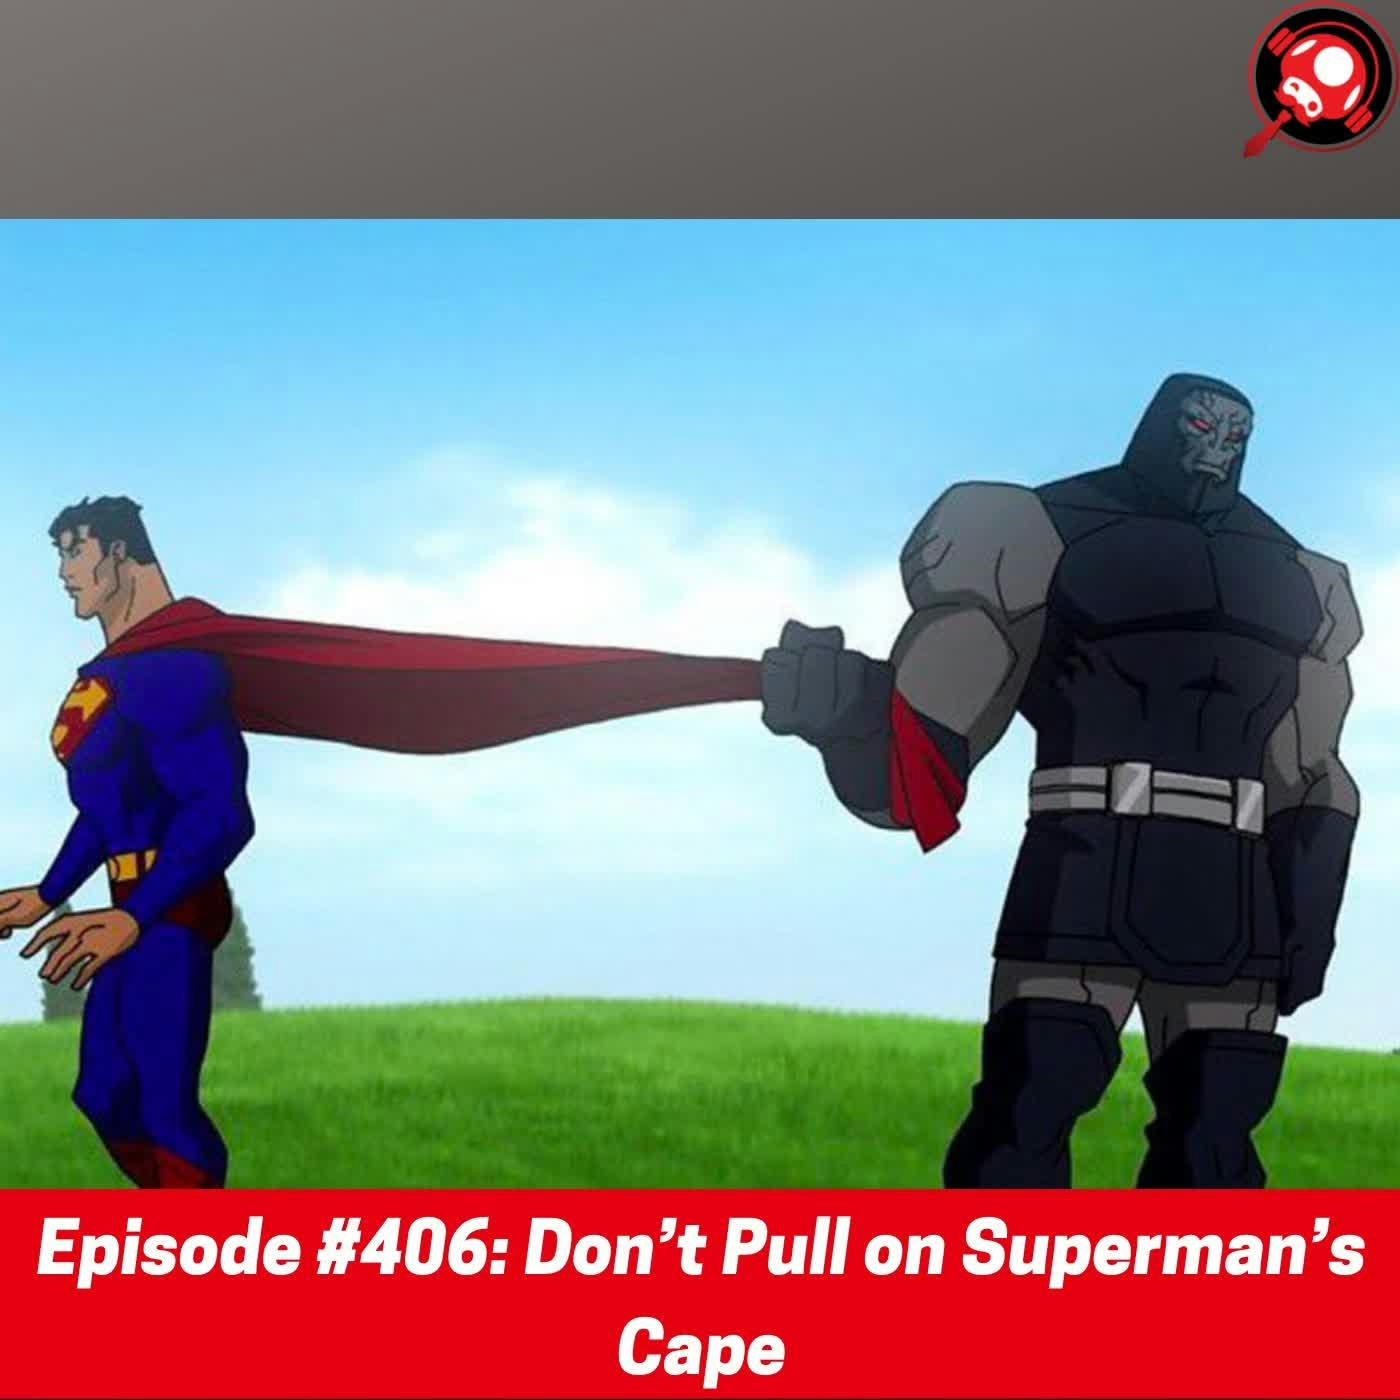 #406: Don’t Pull on Superman’s Cape